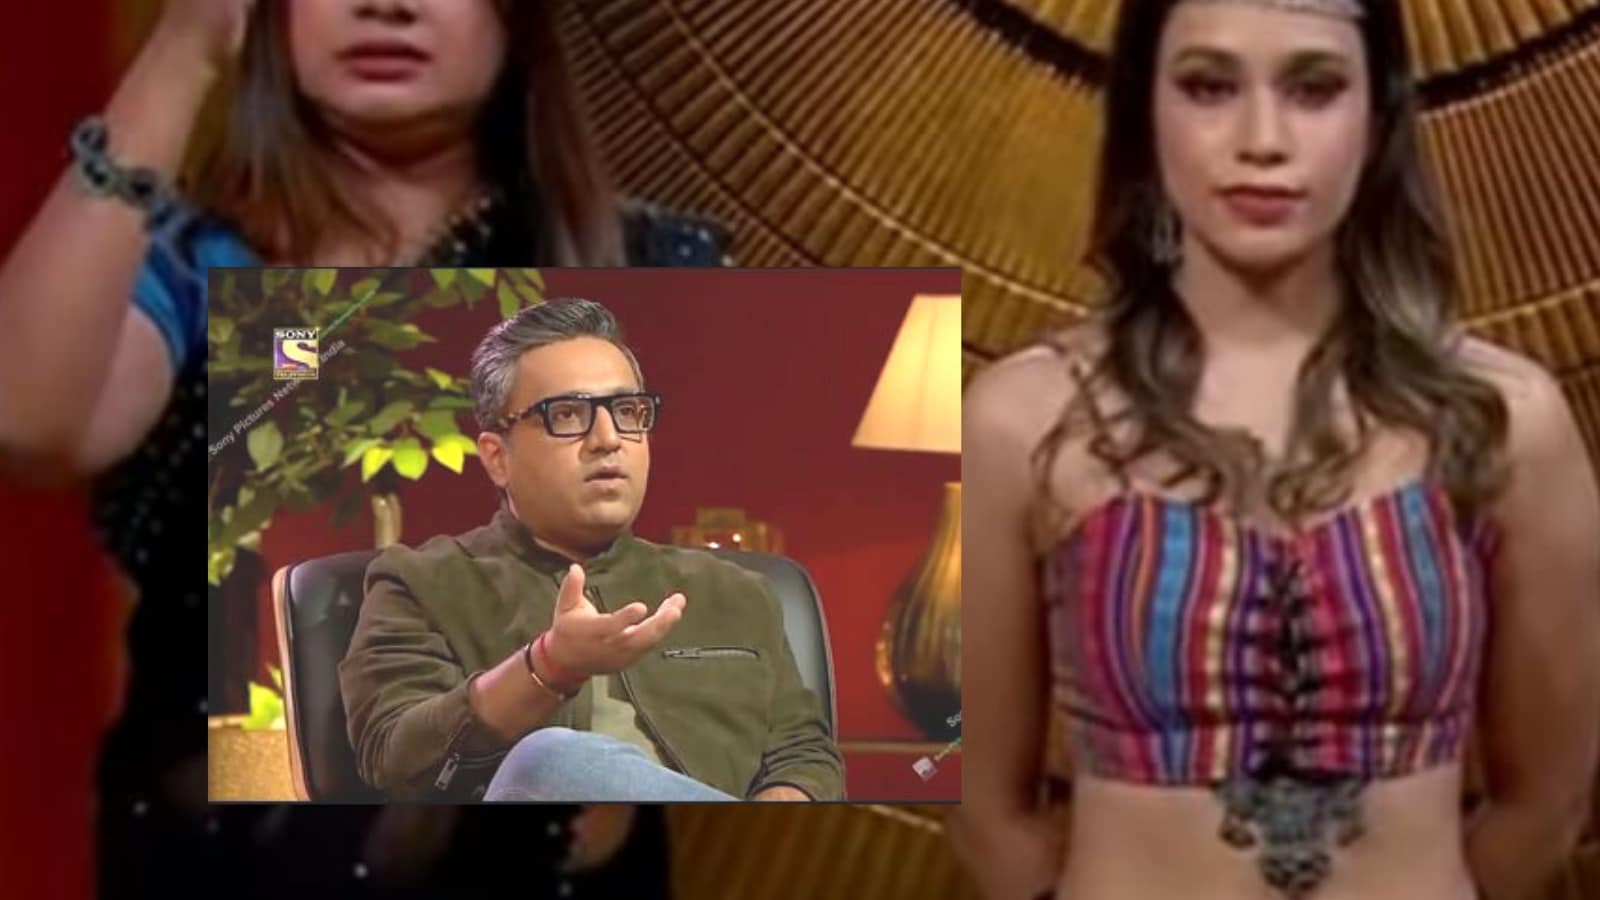 Baldev jumnani ( belly button shaper man) on X: Bitter truth of Indian  reality show  / X